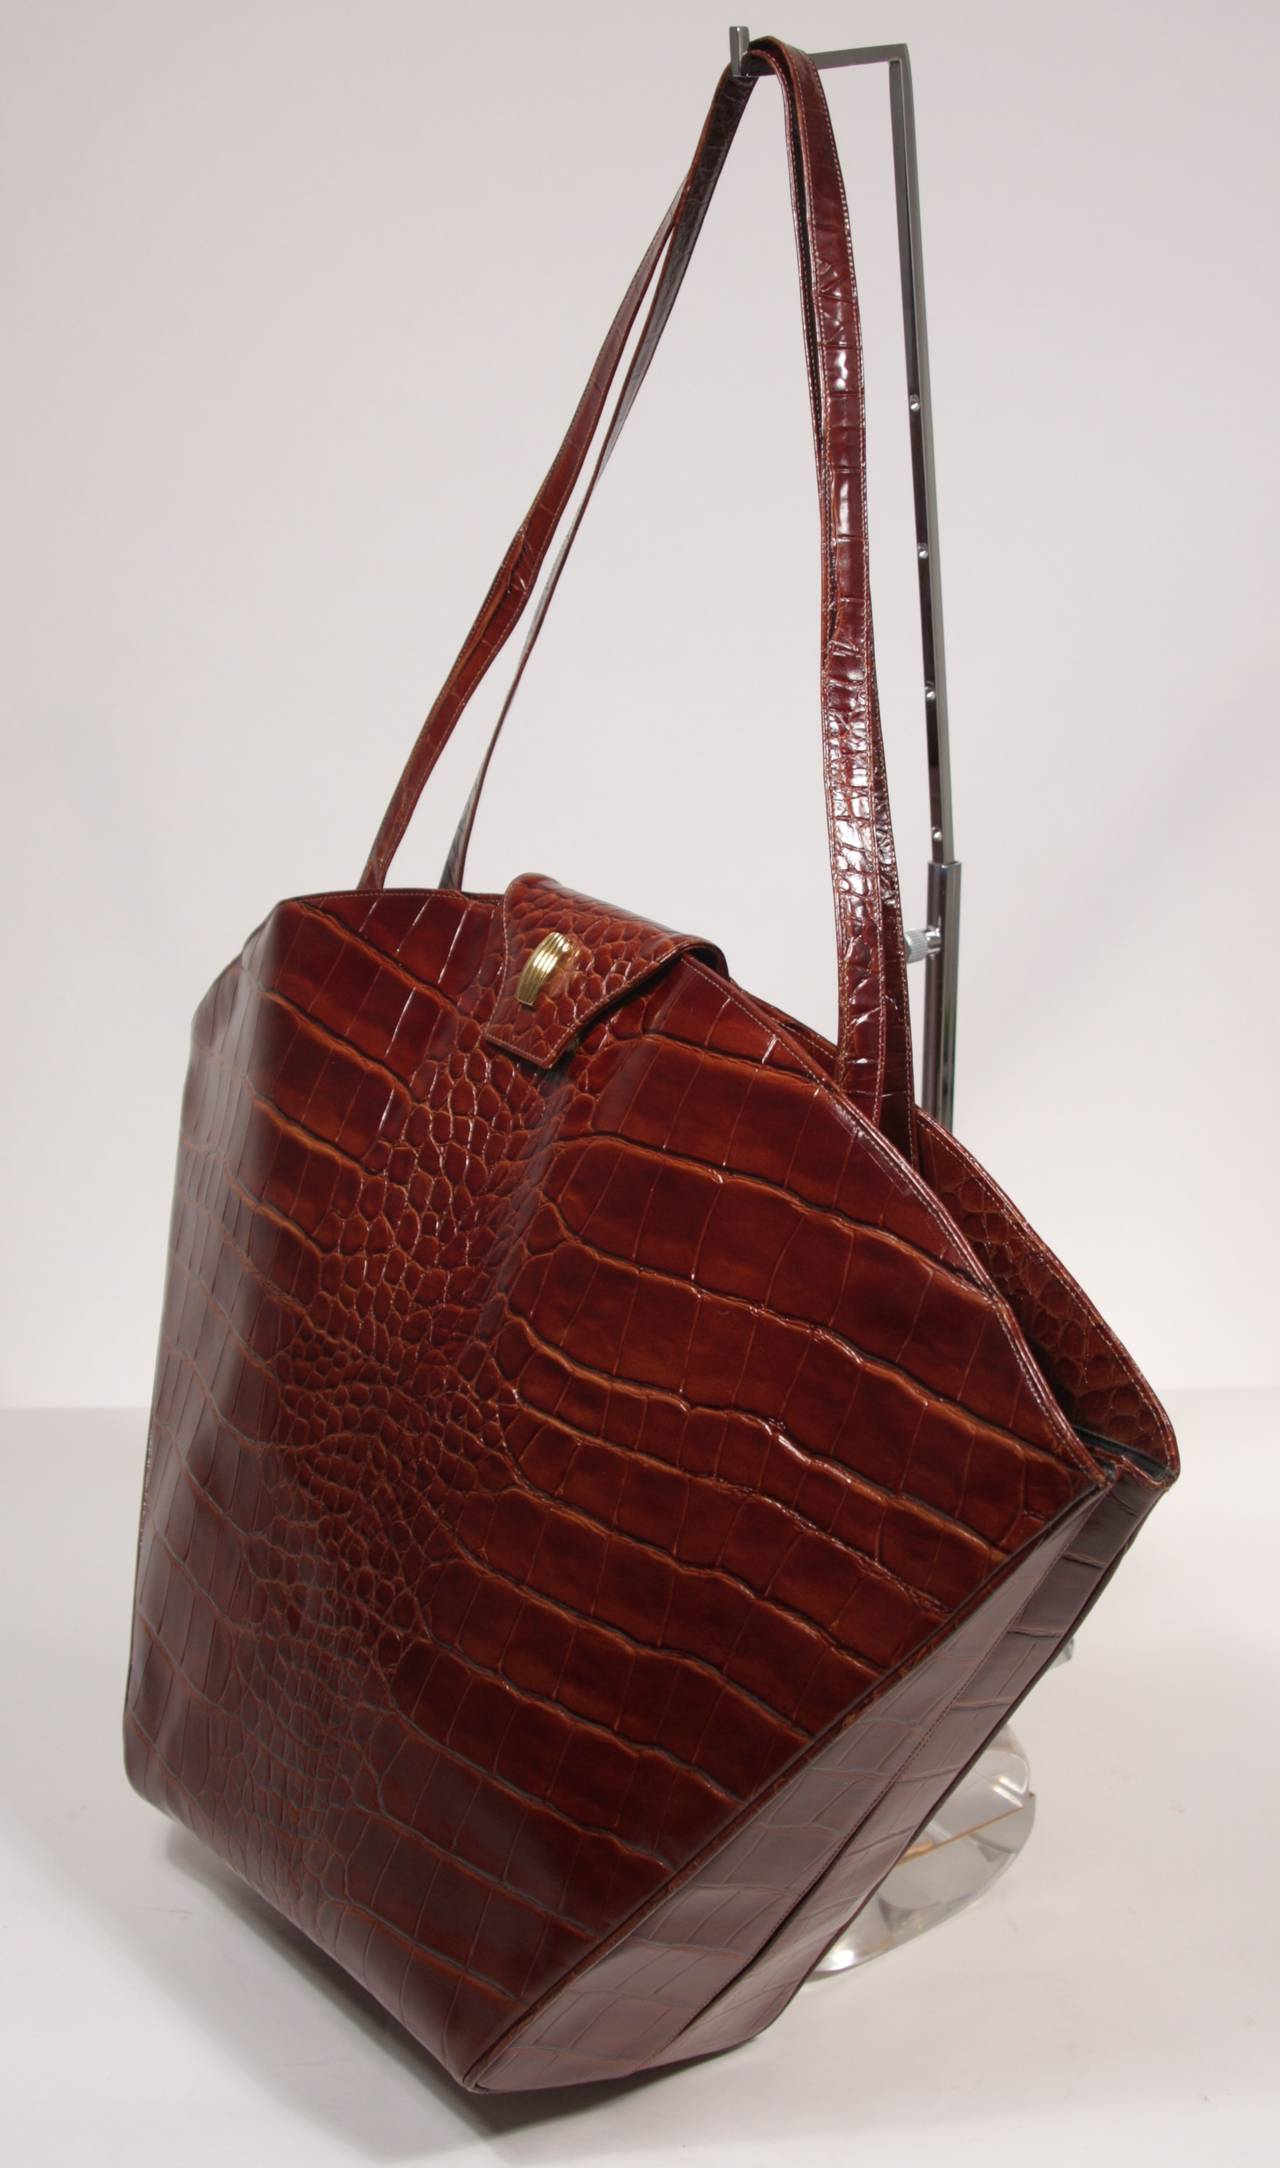 This is a Carey Adina design. This fabulous extra large handbag is stunning. It's extra large size is complemented by a fan shape and design. The bag is composed of a brown/cognac leather and embossed with a crocodile print. There are two interior